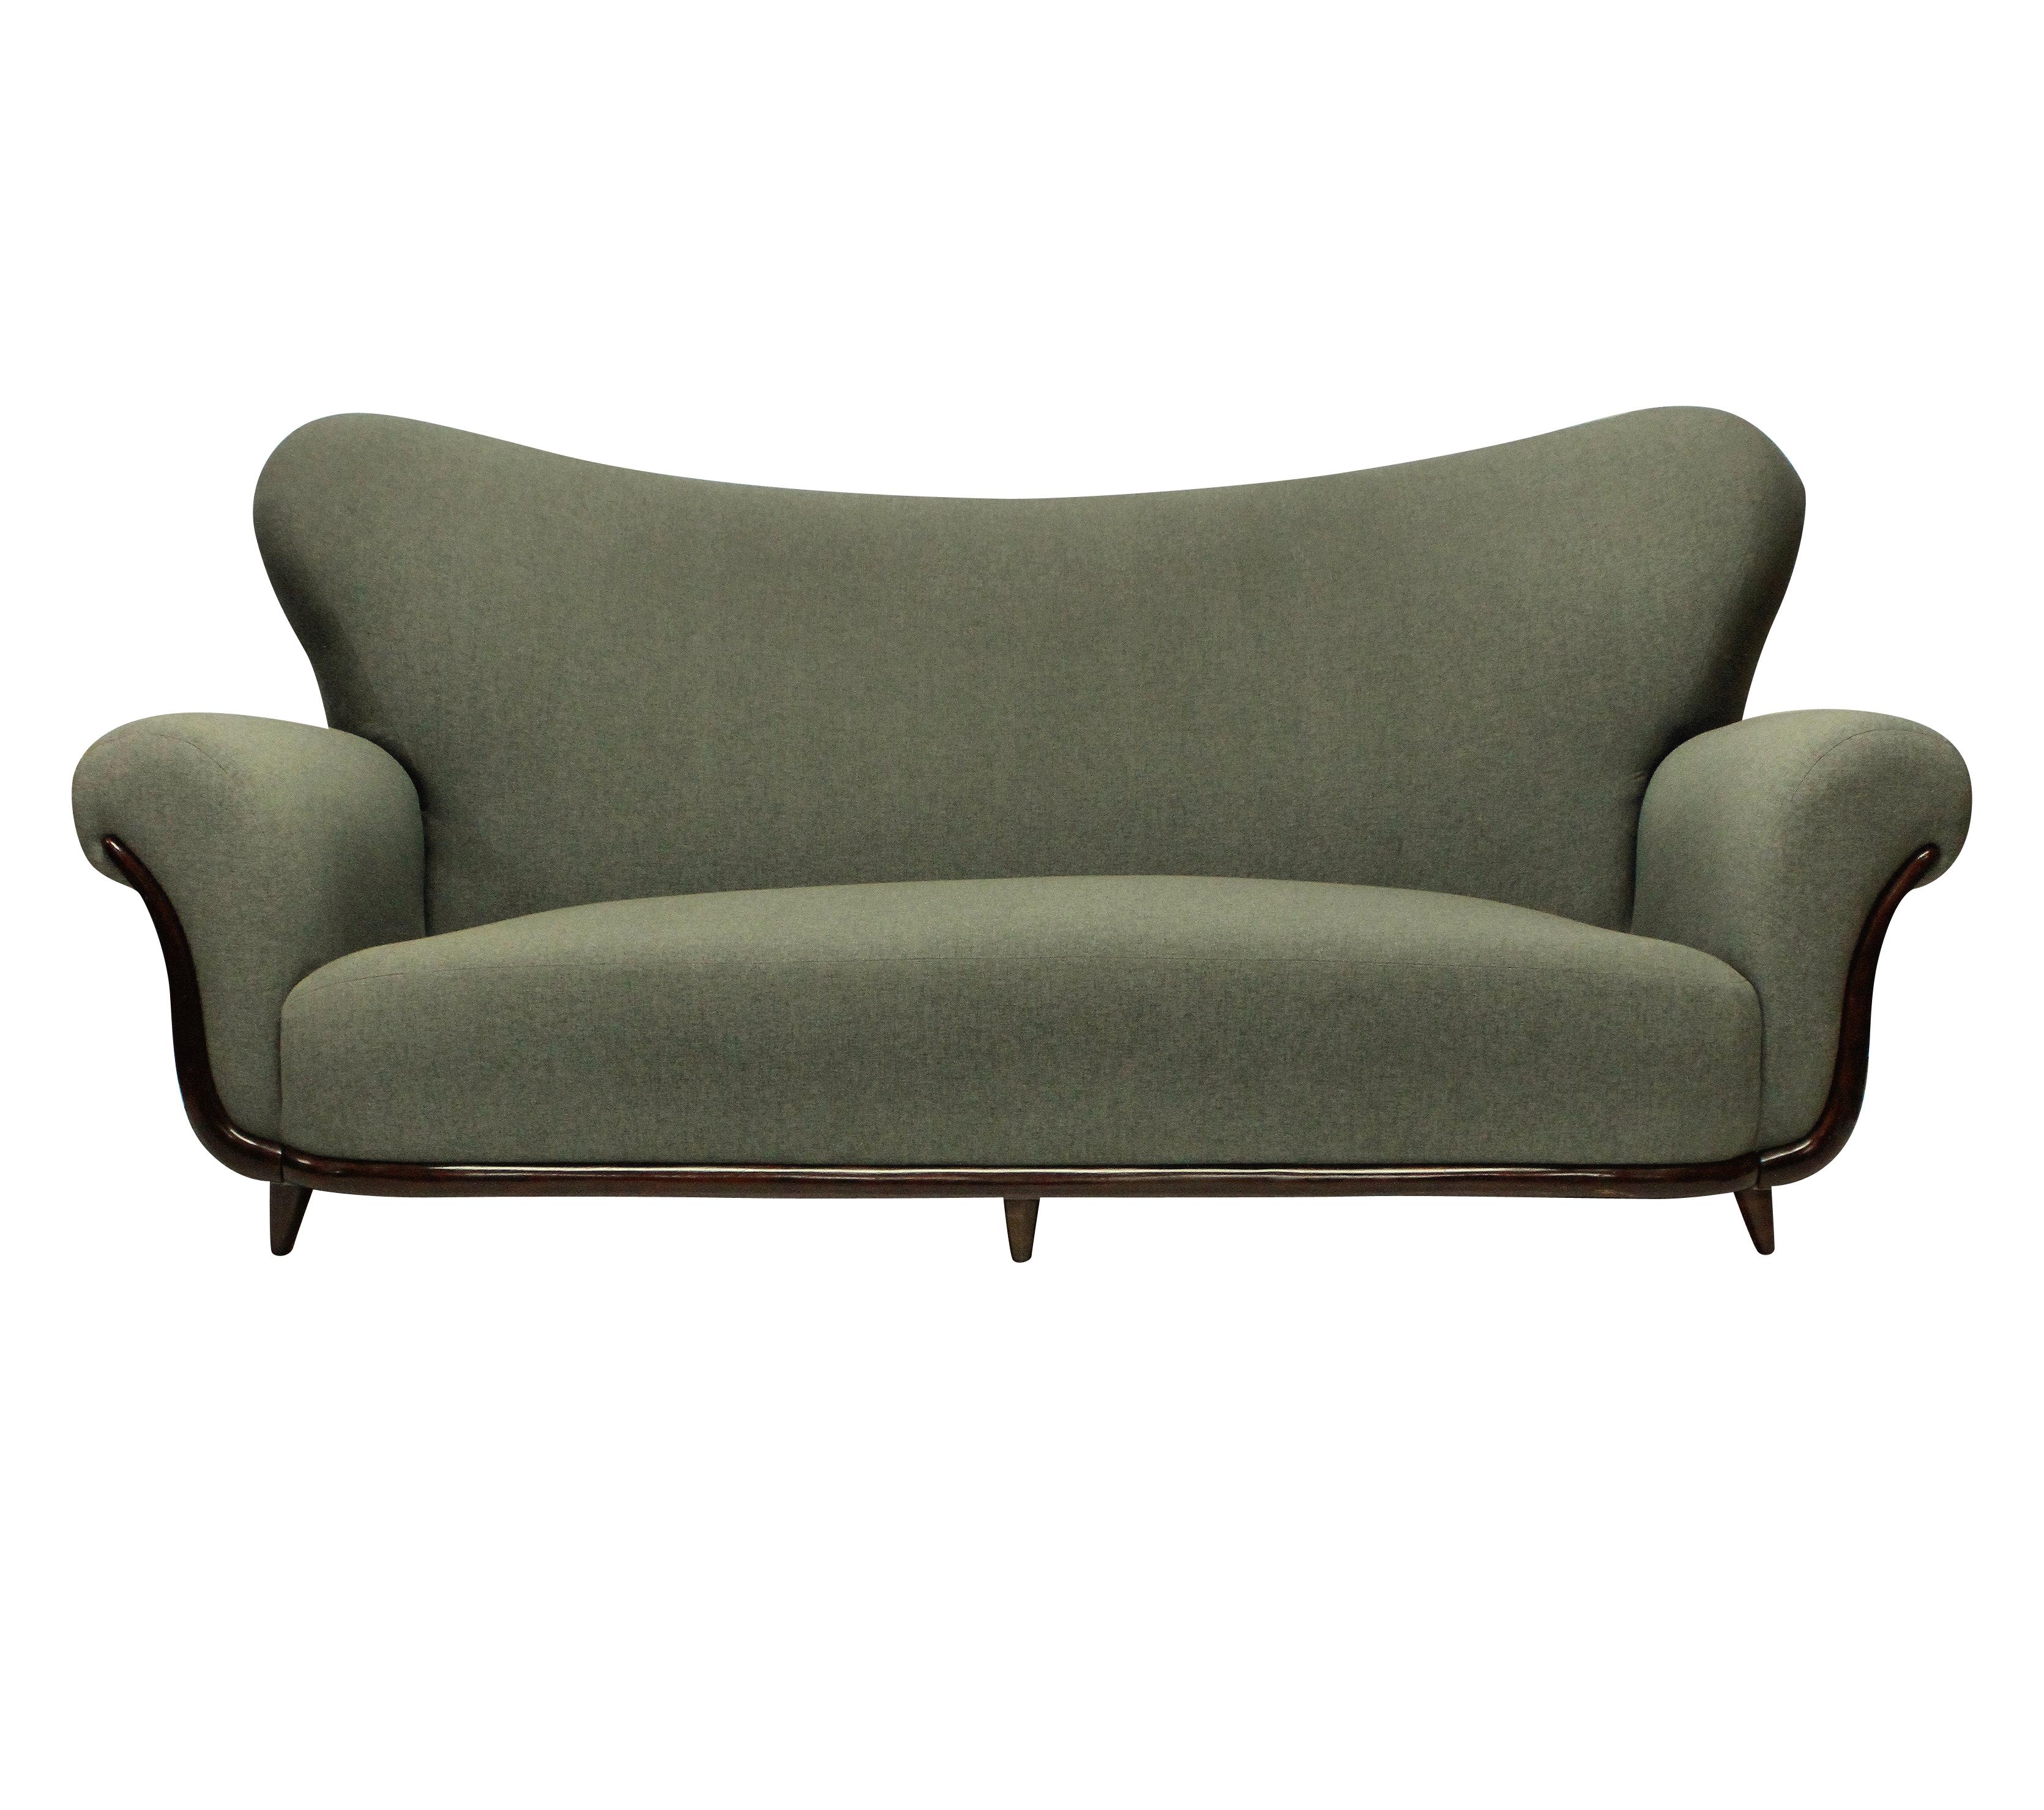 A large Italian sculptural sofa by Ulrich which is very comfortable. Newly upholstered in grey fabric and in a Minimalist fashion without piping or buttons, which accentuates the curved shapes. On tapering French polished feet and curved trim